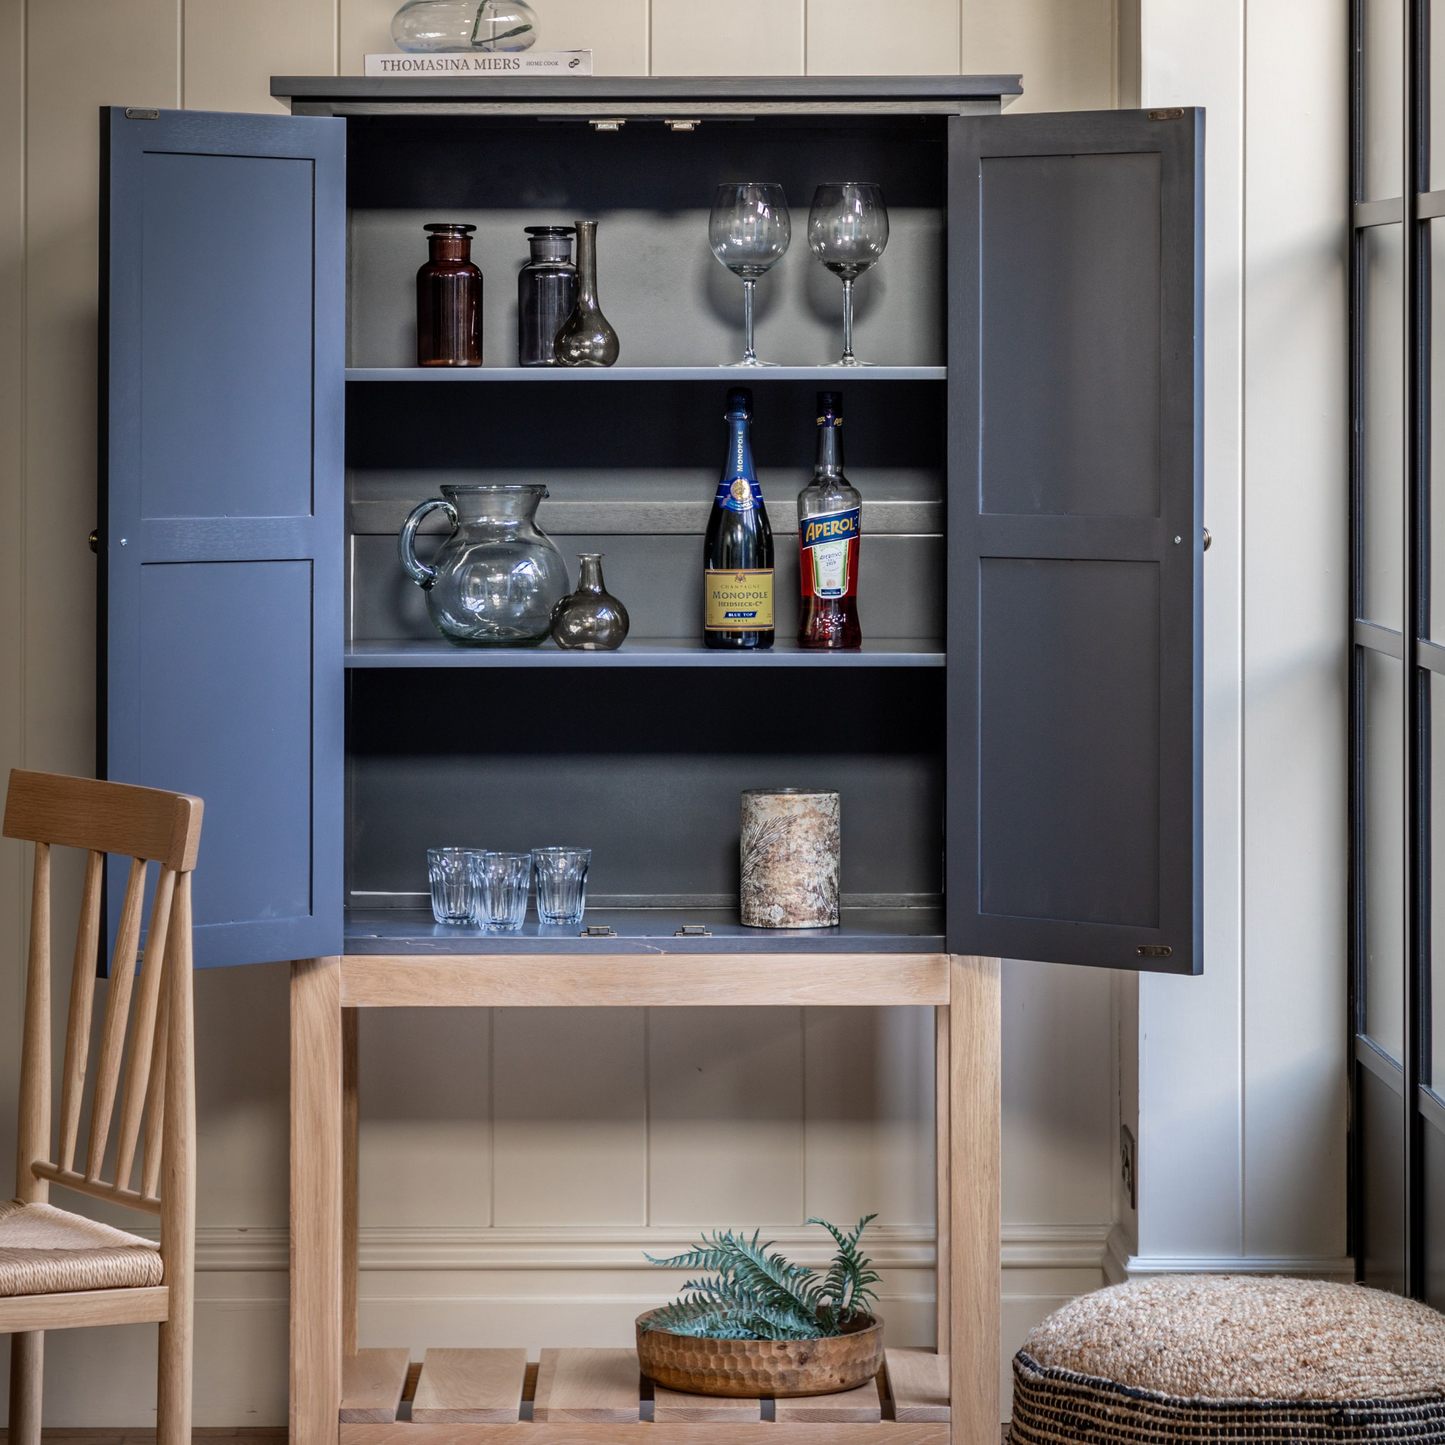 A Kikiathome.co.uk Buckland 2 Door Storage Cupboard in Meteor is a stylish addition to your home furniture and interior decor.